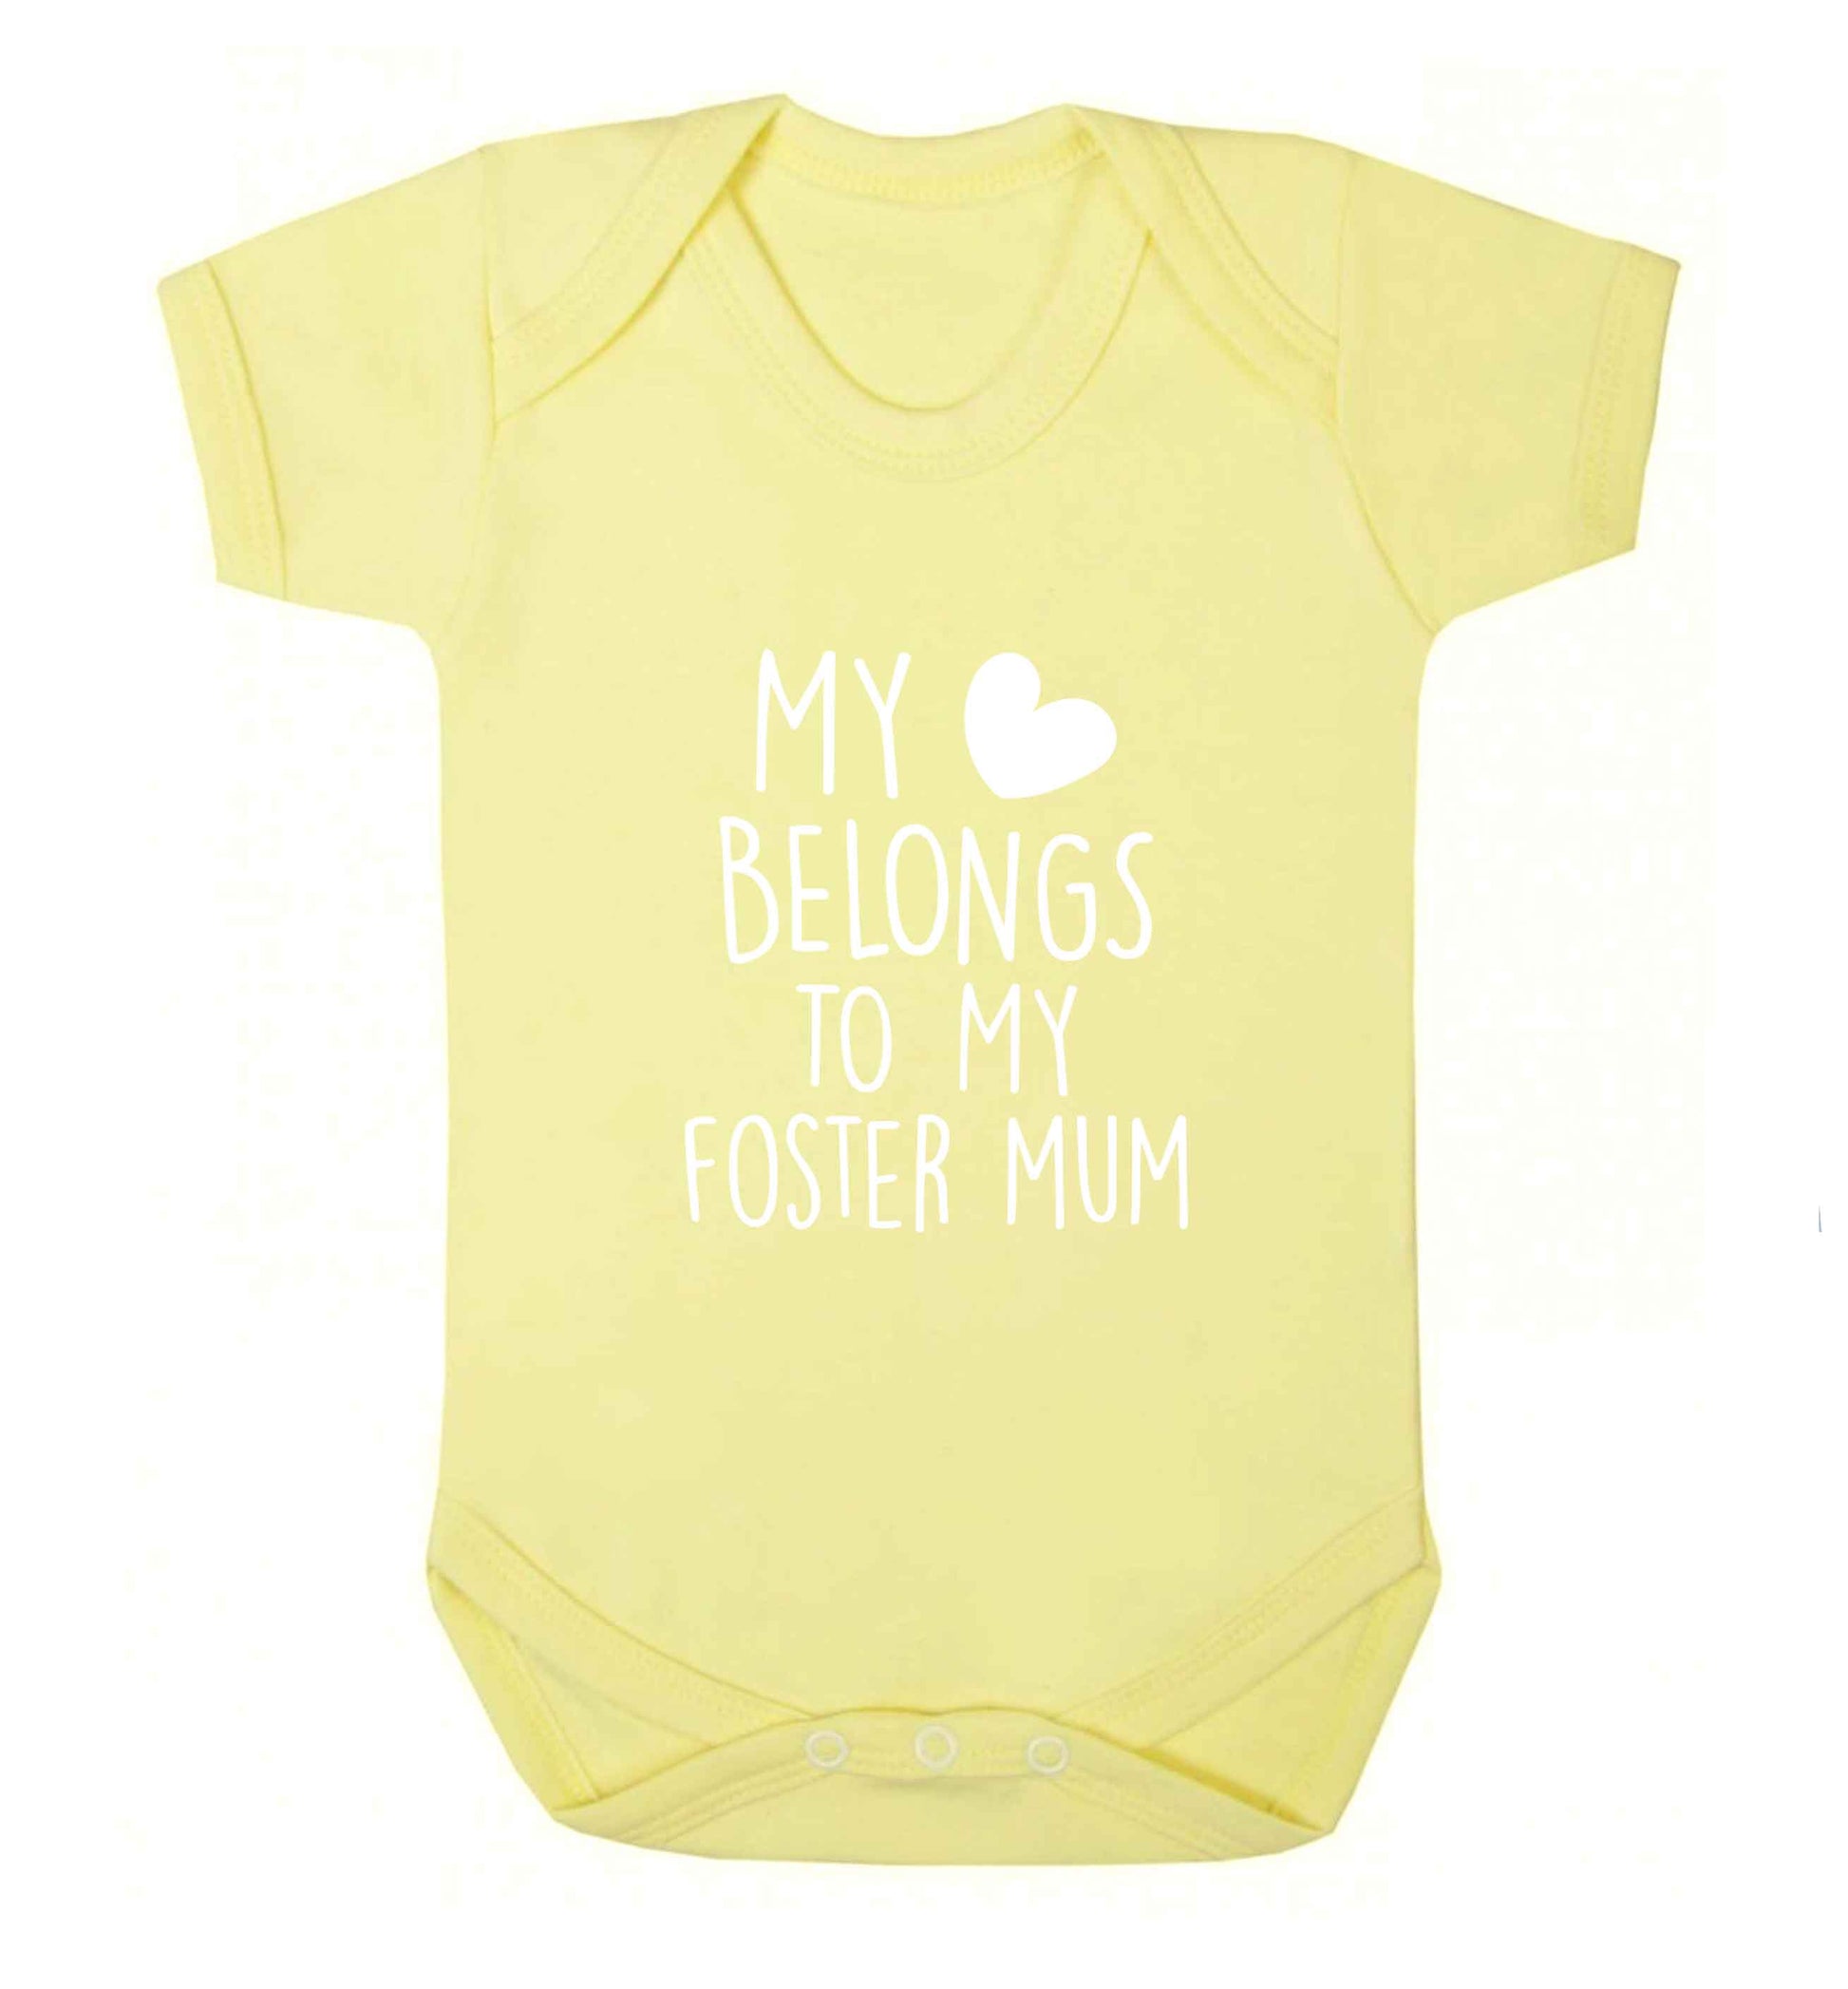 My heart belongs to my foster mum baby vest pale yellow 18-24 months